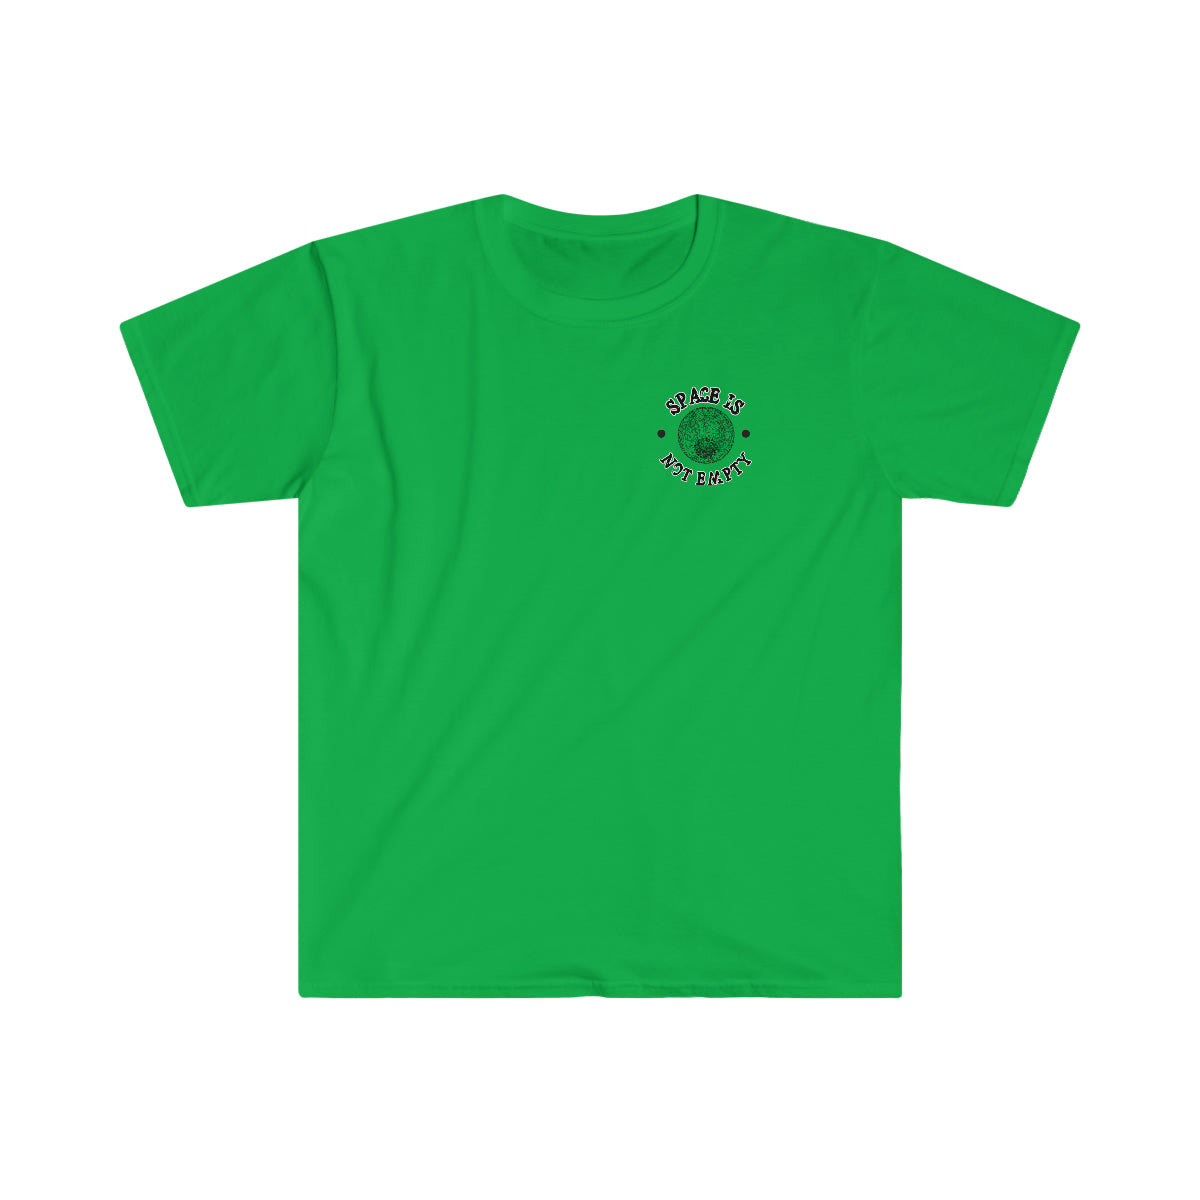 A Stages of Landing T-Shirt with a green flower print on it.